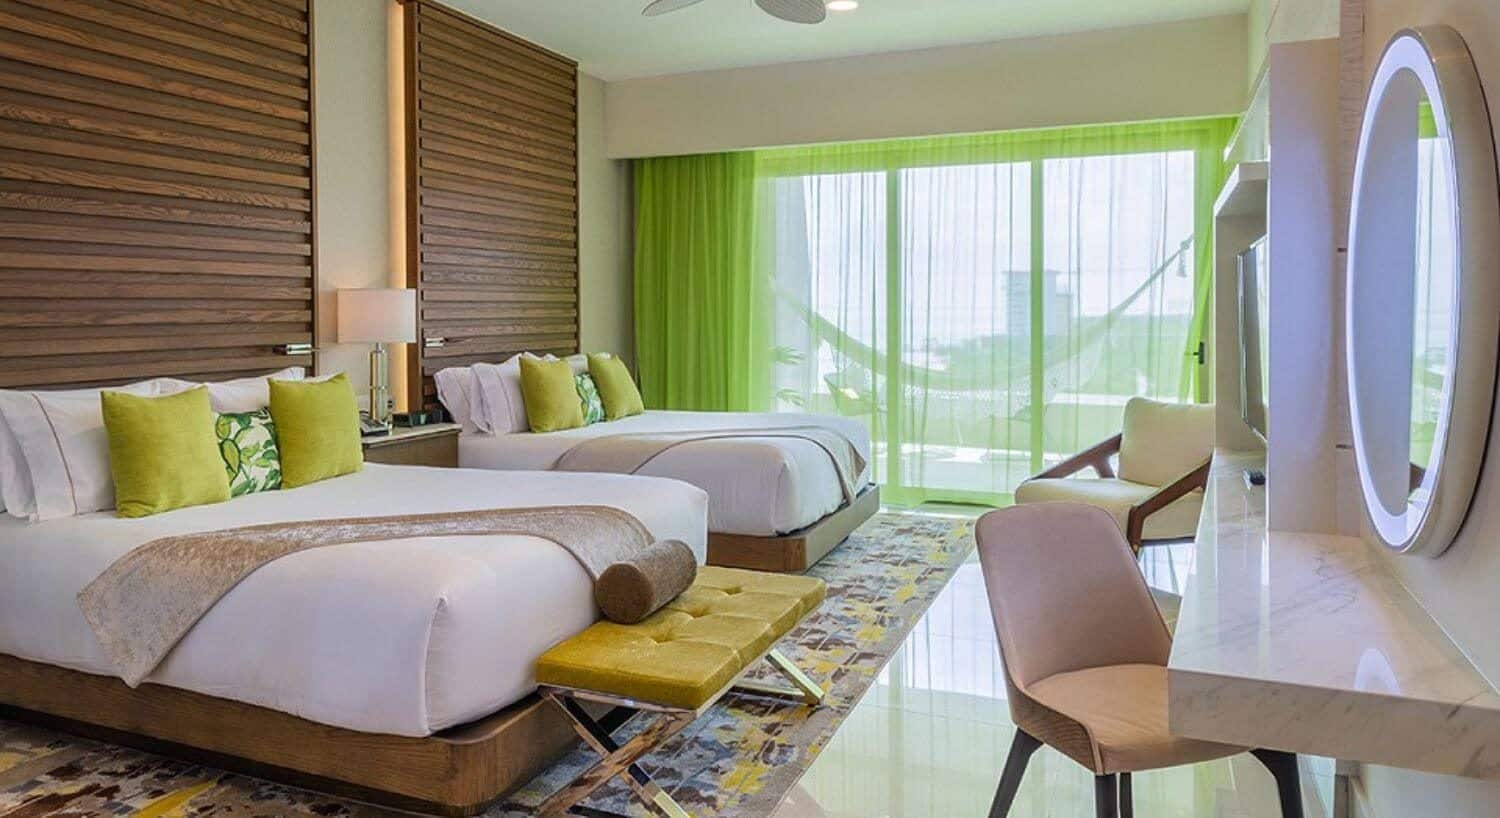 A bedroom with 2 queen beds with floor to ceiling wood headboards, a nightstand and lamp in between them, a bench at the foot of one bed, a writing desk and chair, and sliding doors with sheer green curtains that lead out to a private balcony with hammock.